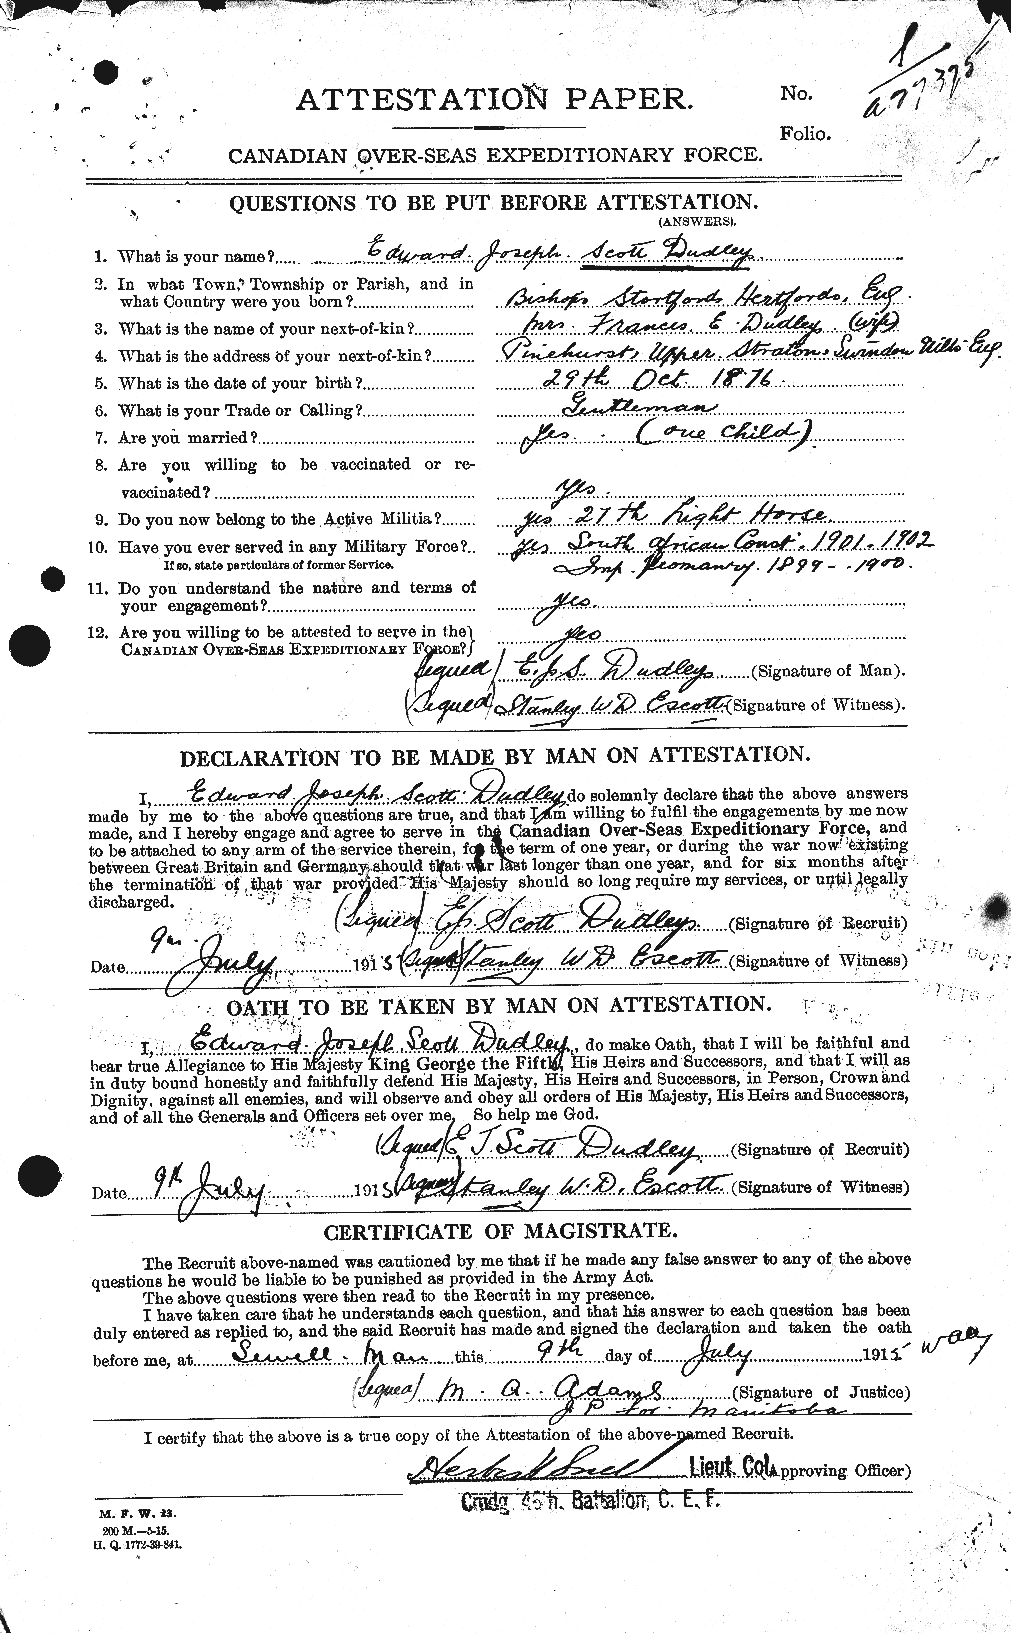 Personnel Records of the First World War - CEF 087243a